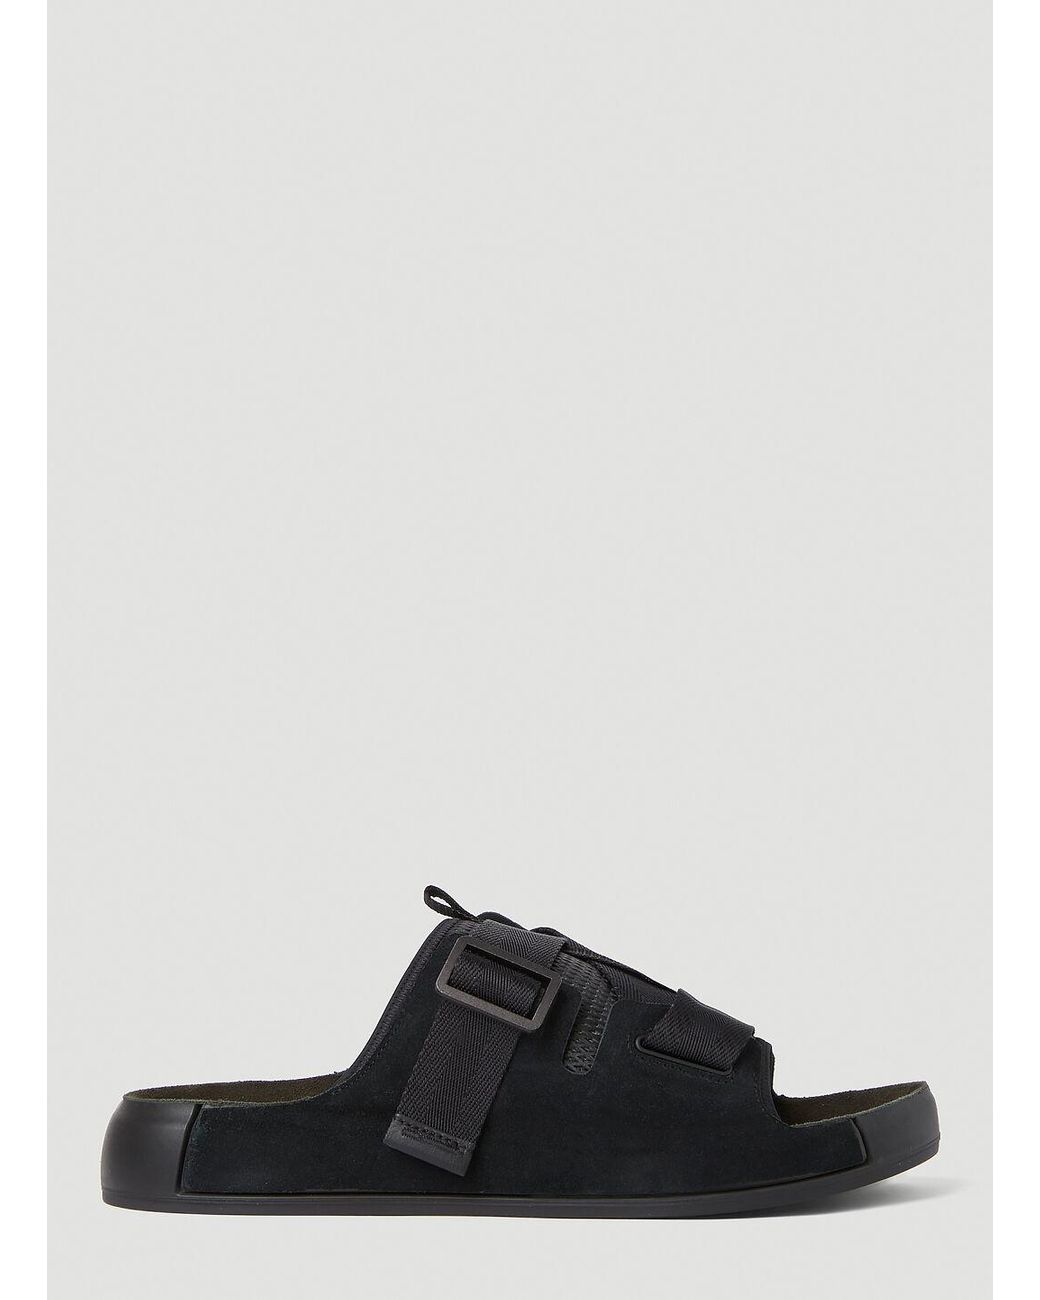 Stone Island Shadow Project Tape Sandals in Black for Men | Lyst Canada